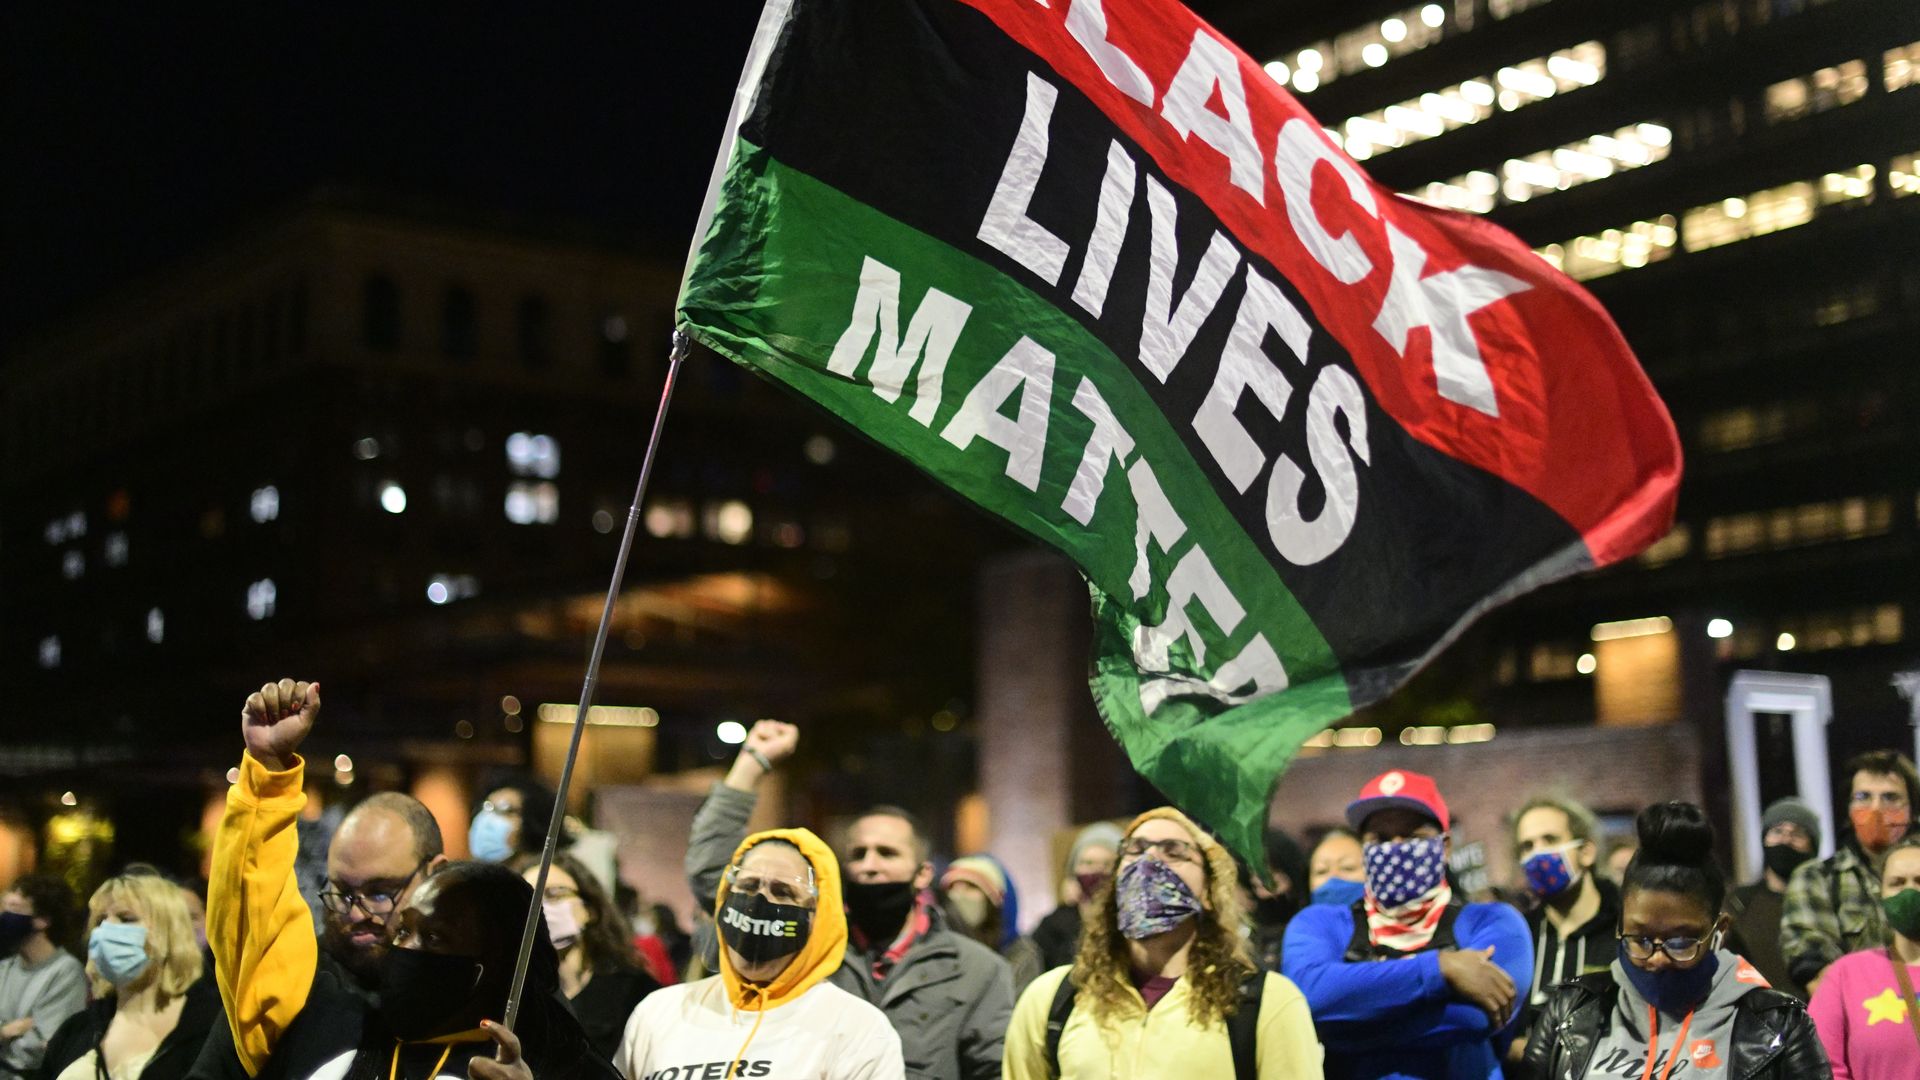 A Black Lives Matter flag hangs above a group of people walking in the street at night, with a city building behind them